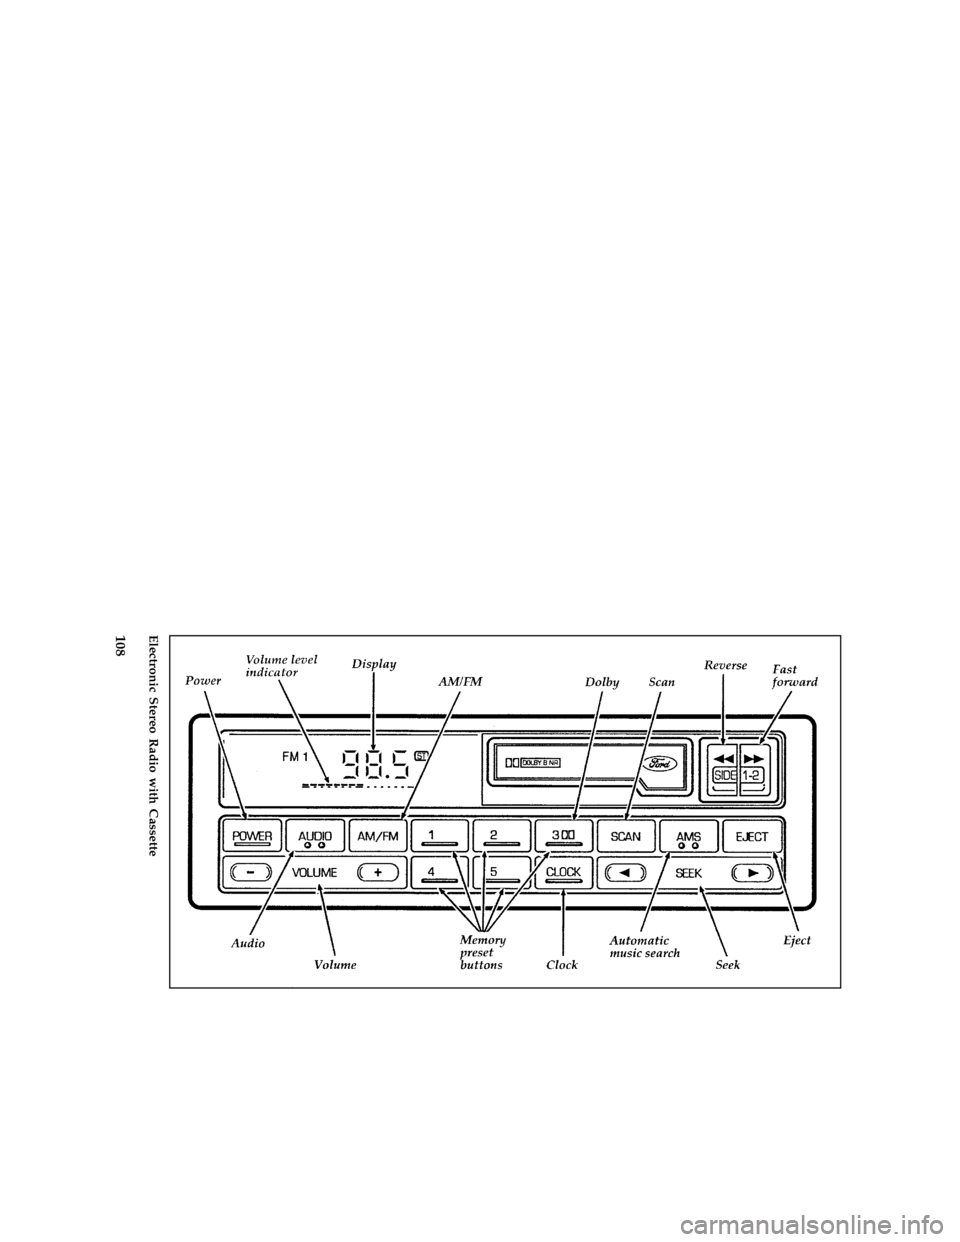 FORD ASPIRE 1996 1.G Owners Manual 108
*
[AS21360(ALL)04/95]
full page art:0060587-C
Electronic Stereo Radio with Cassette
File:09icasf.ex
Update:Wed Jan 24 14:52:32 1996 